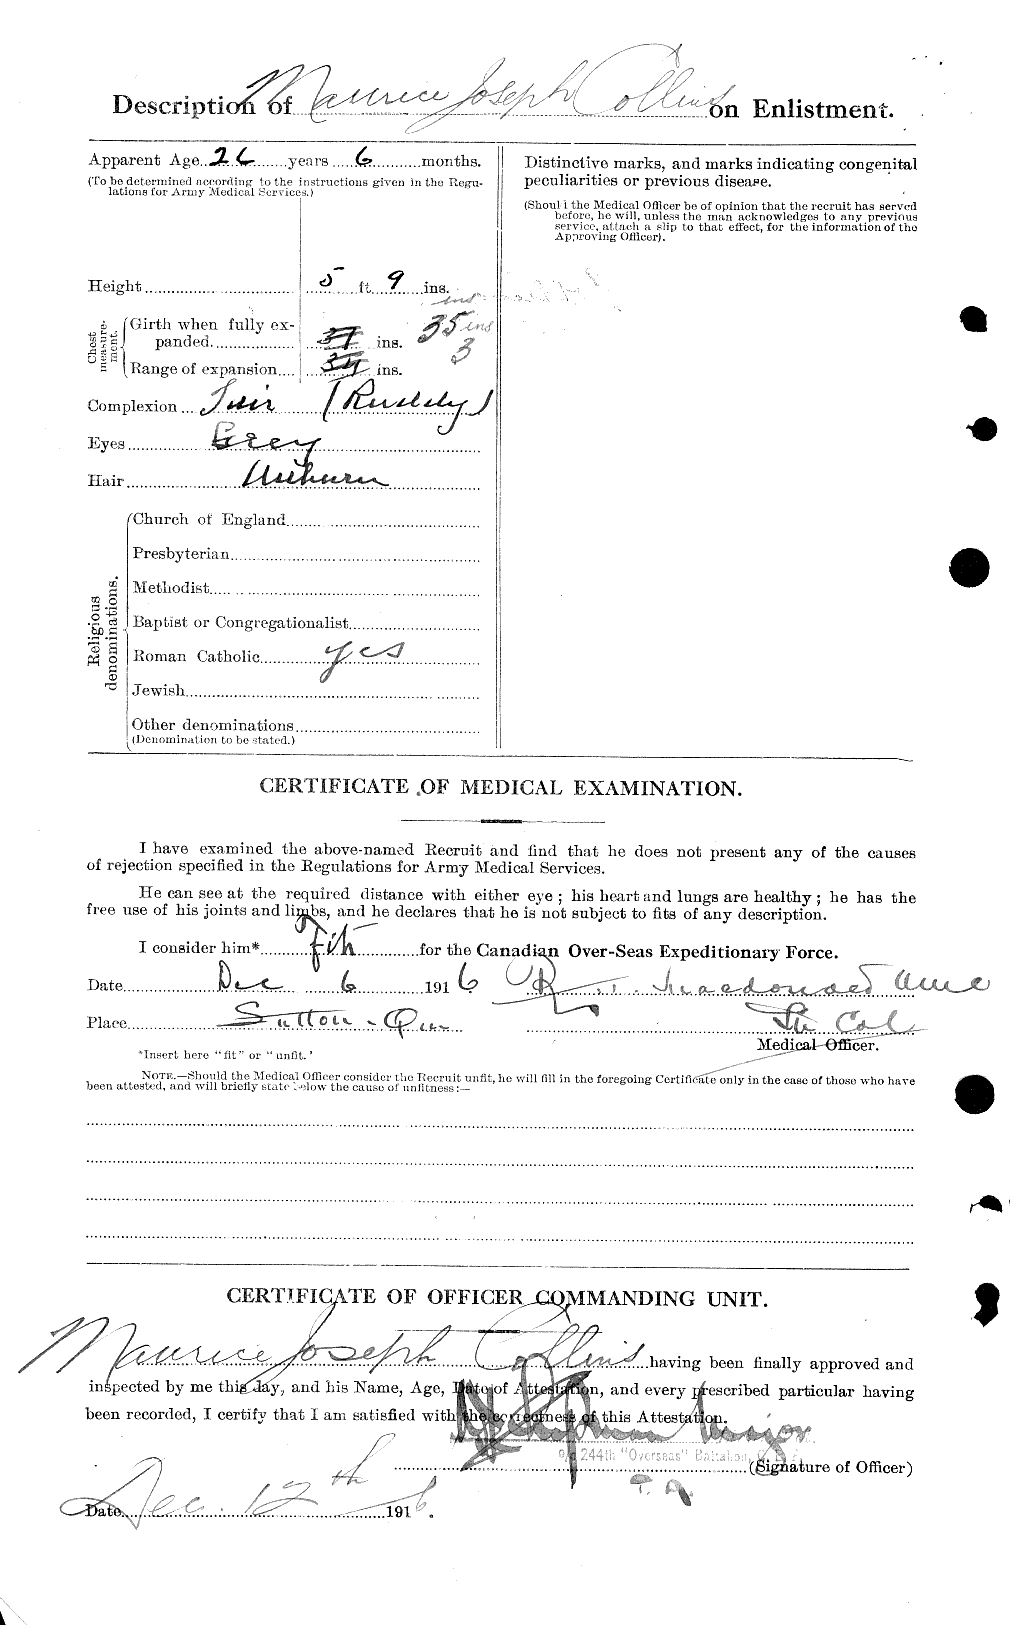 Personnel Records of the First World War - CEF 034462b